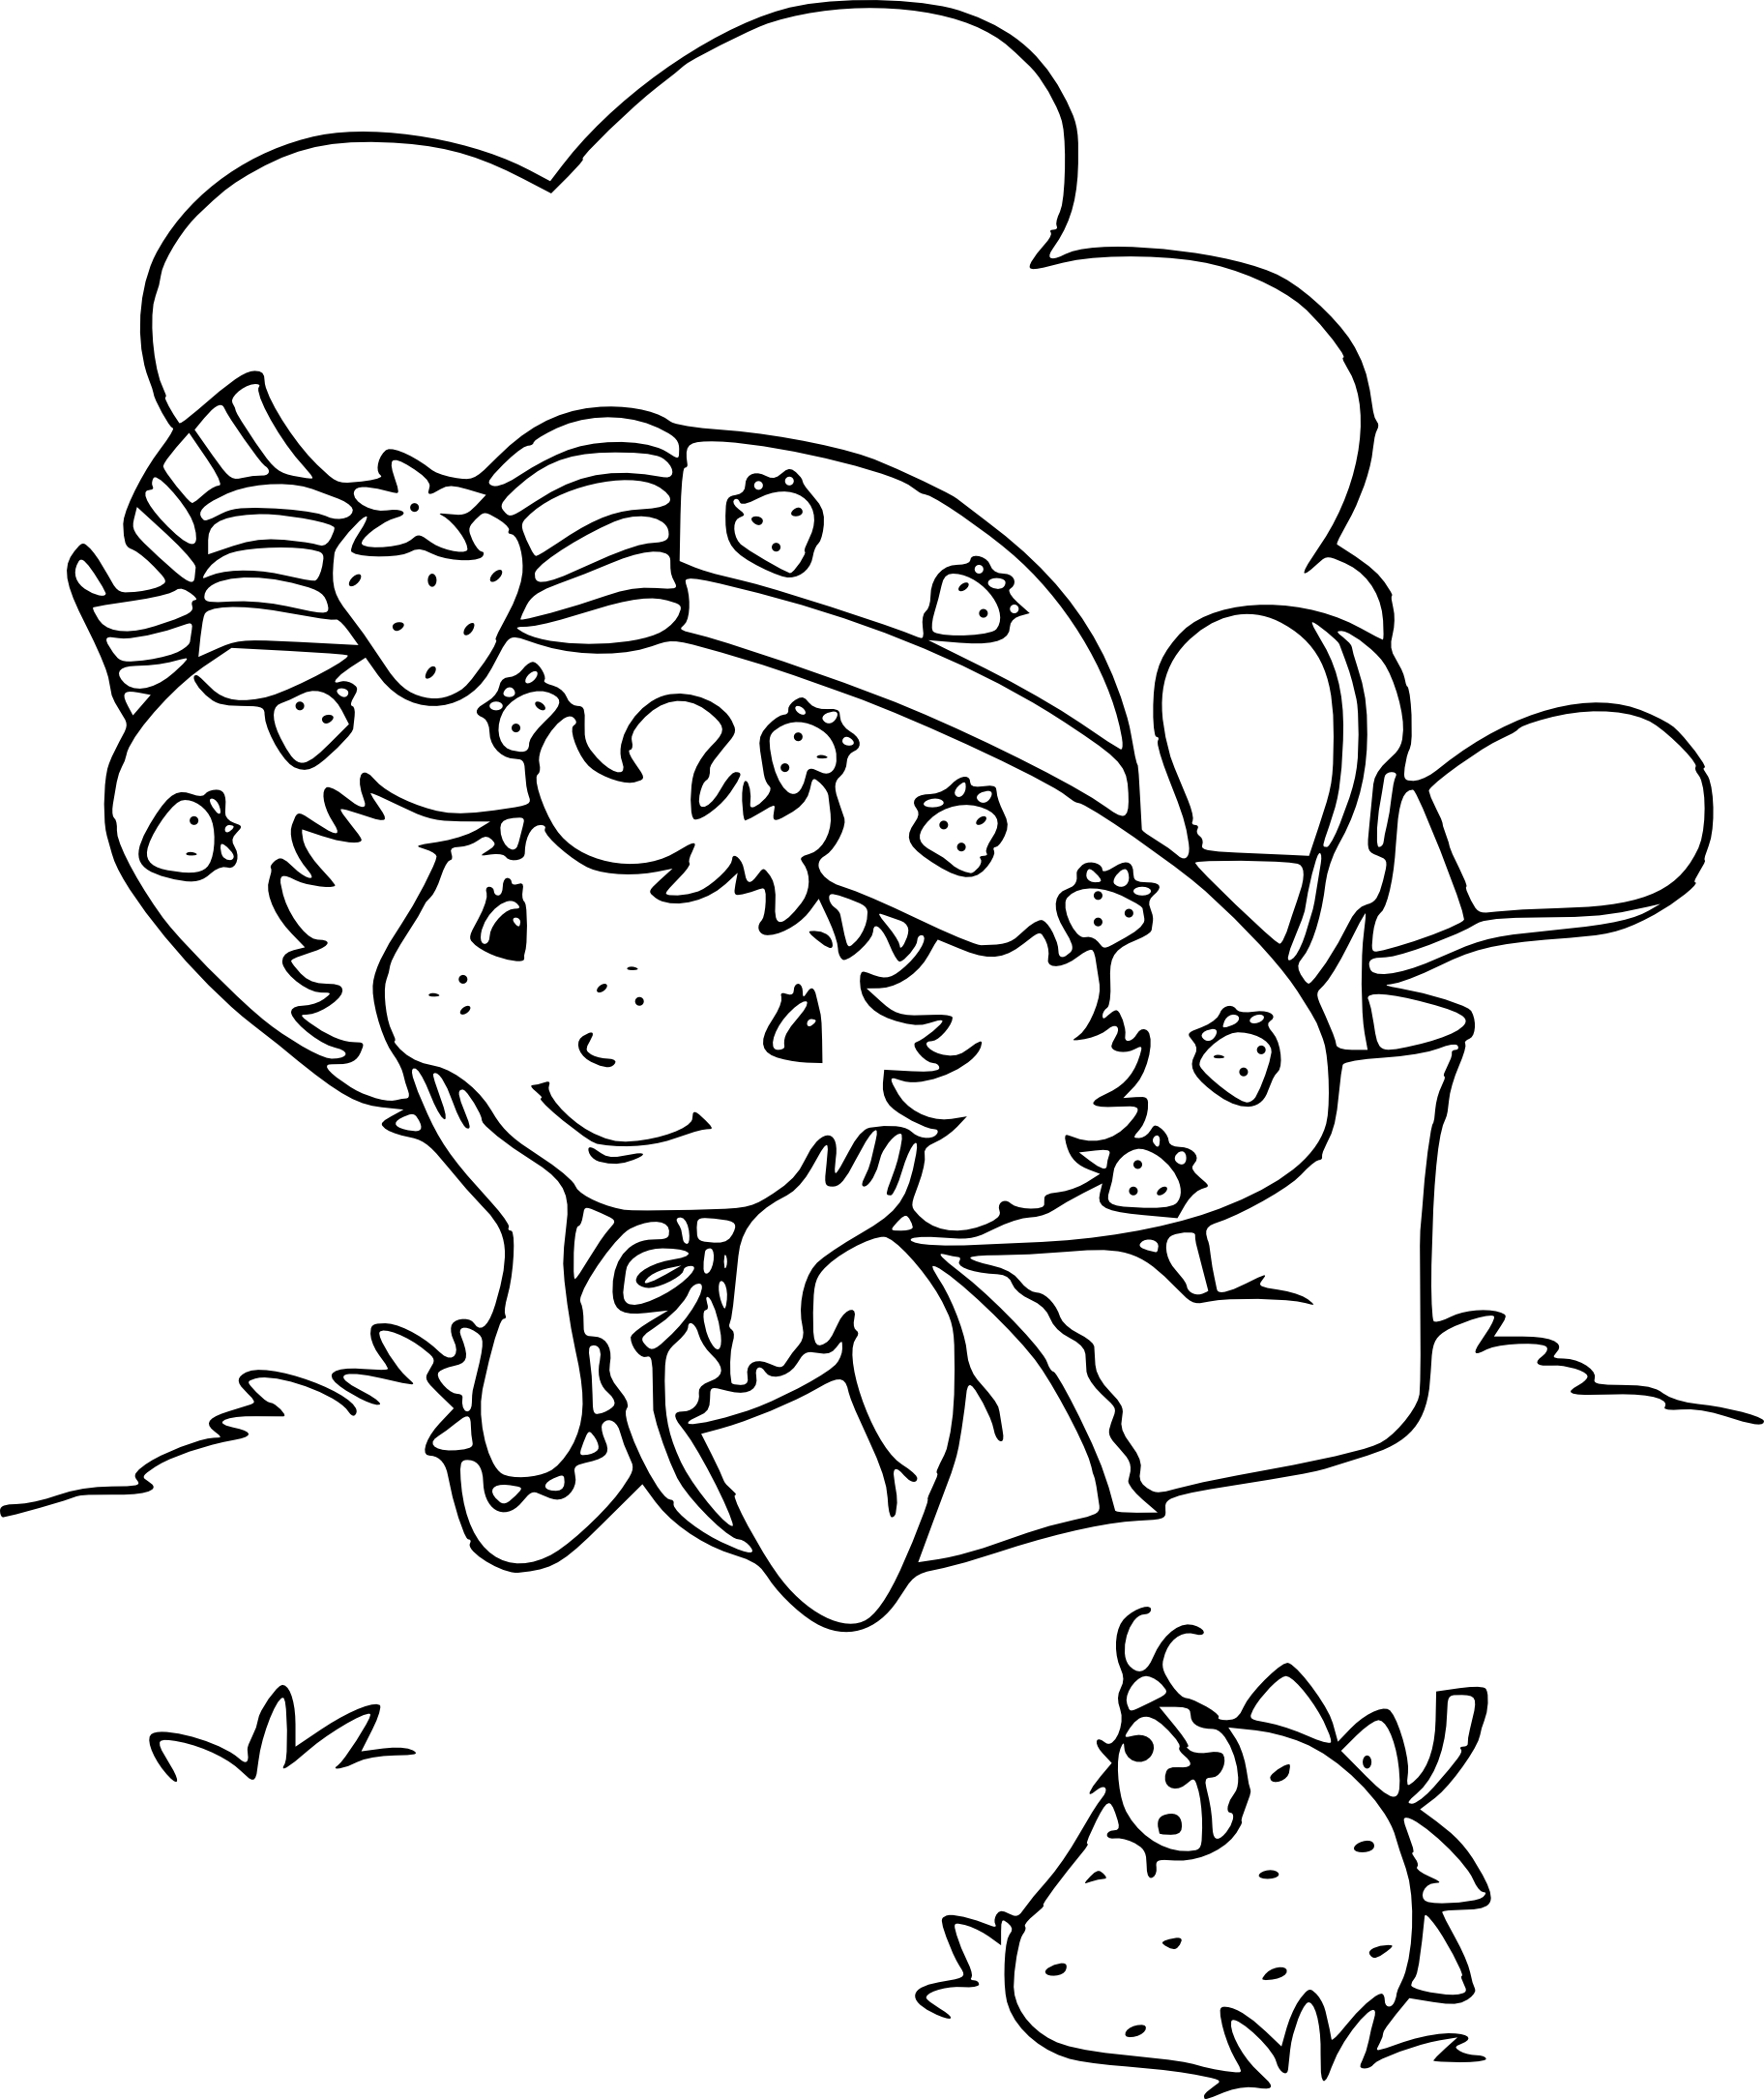 Free Strawberry Shortcake coloring page